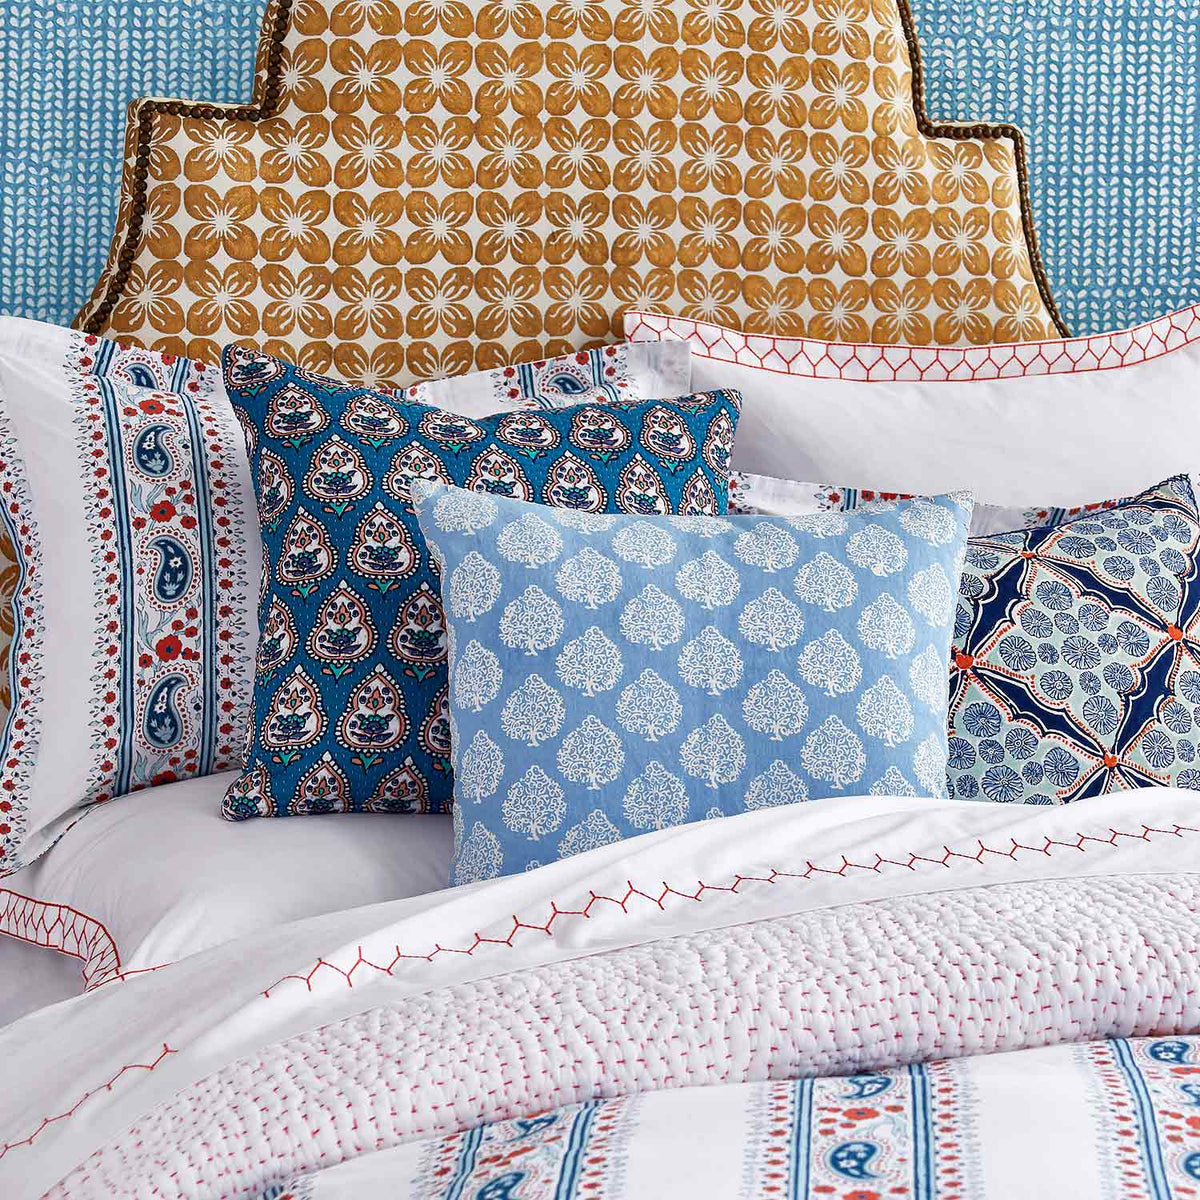 John Robshaw Organic Hand Stitched Quilts and Shams Lifestyle Lotus Fine Linens